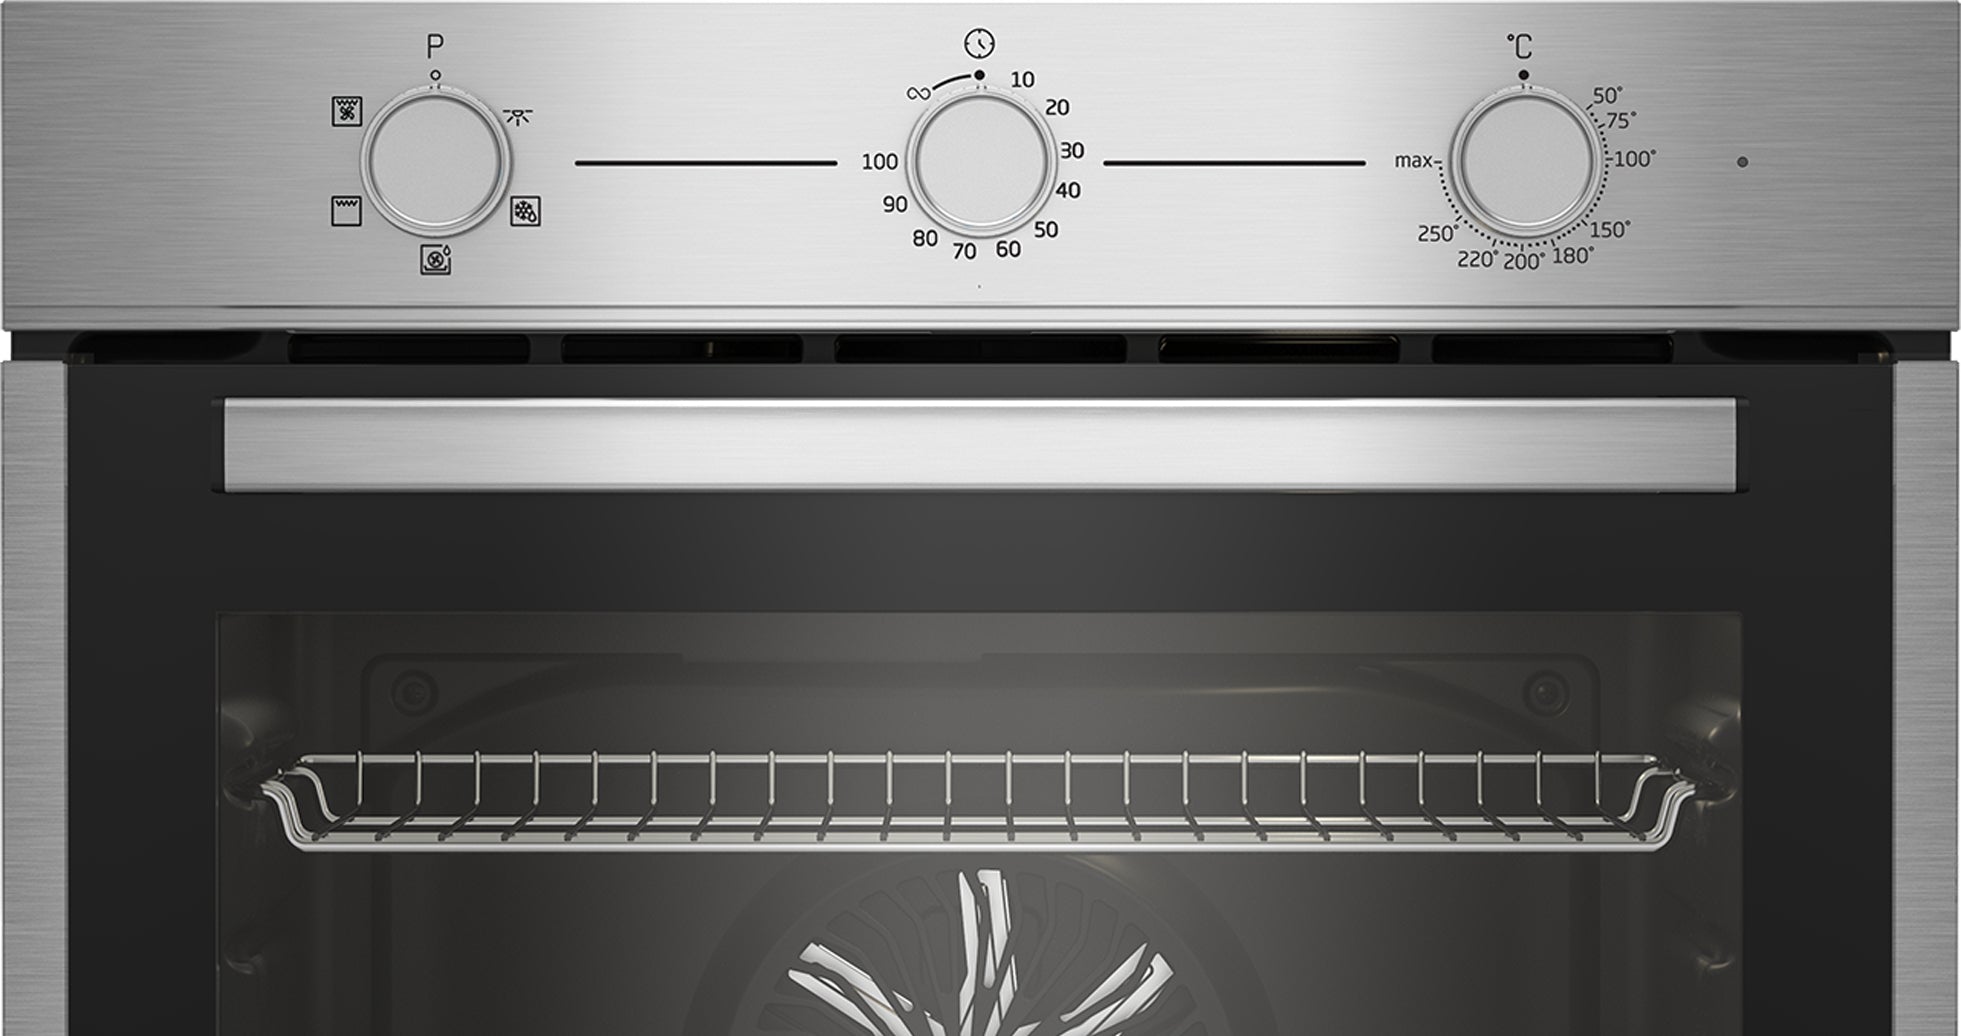 Beko BBIF16100X 60cm Built-In Oven with AeroPerfect with Steam Clean